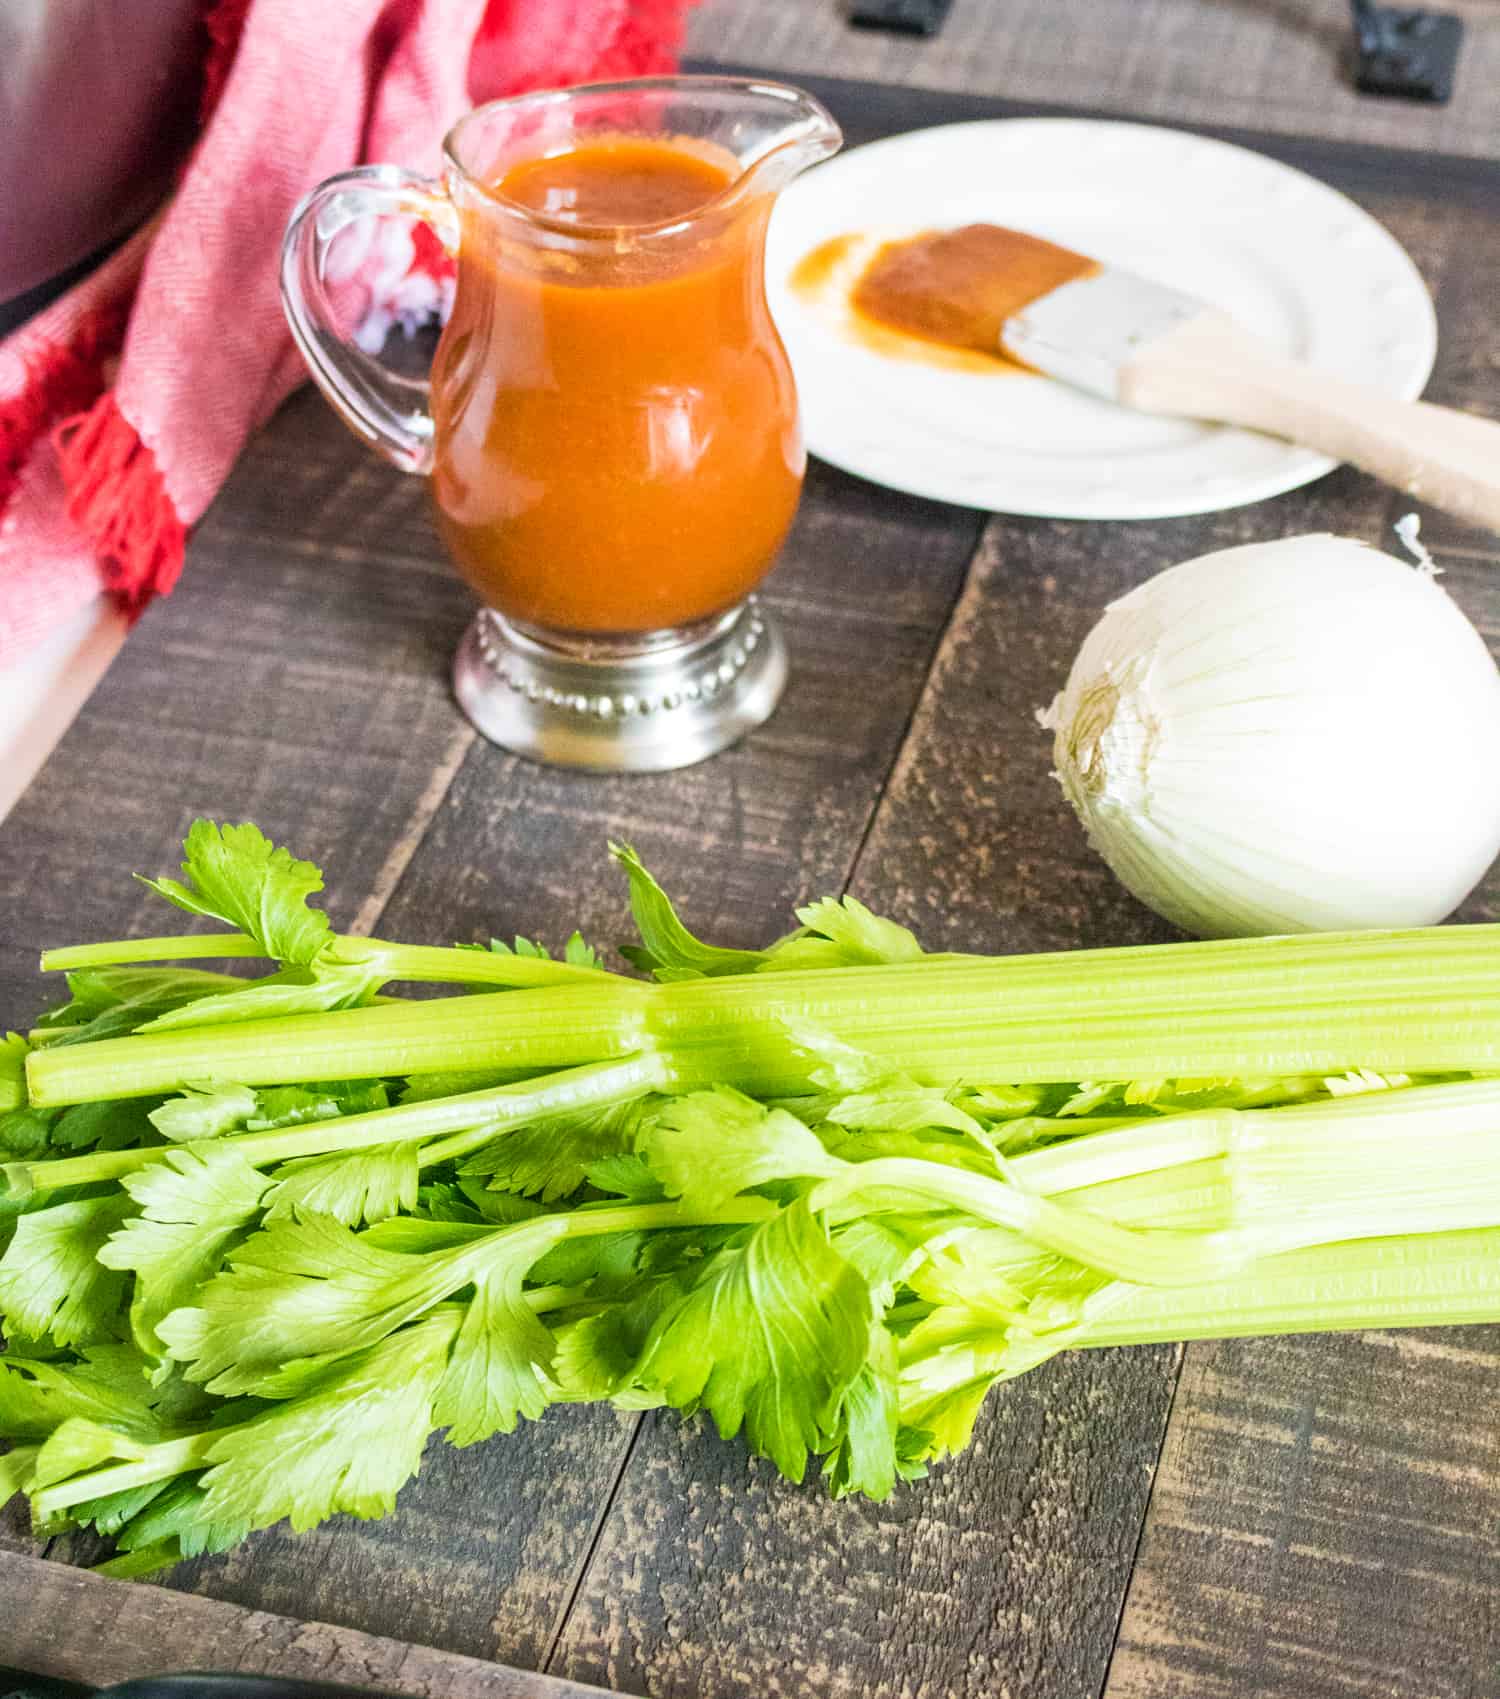 barbecue Sauce in a clear glass pitcher next to celery stalks, an onion, and a BBQ brush on a wooden serving tray